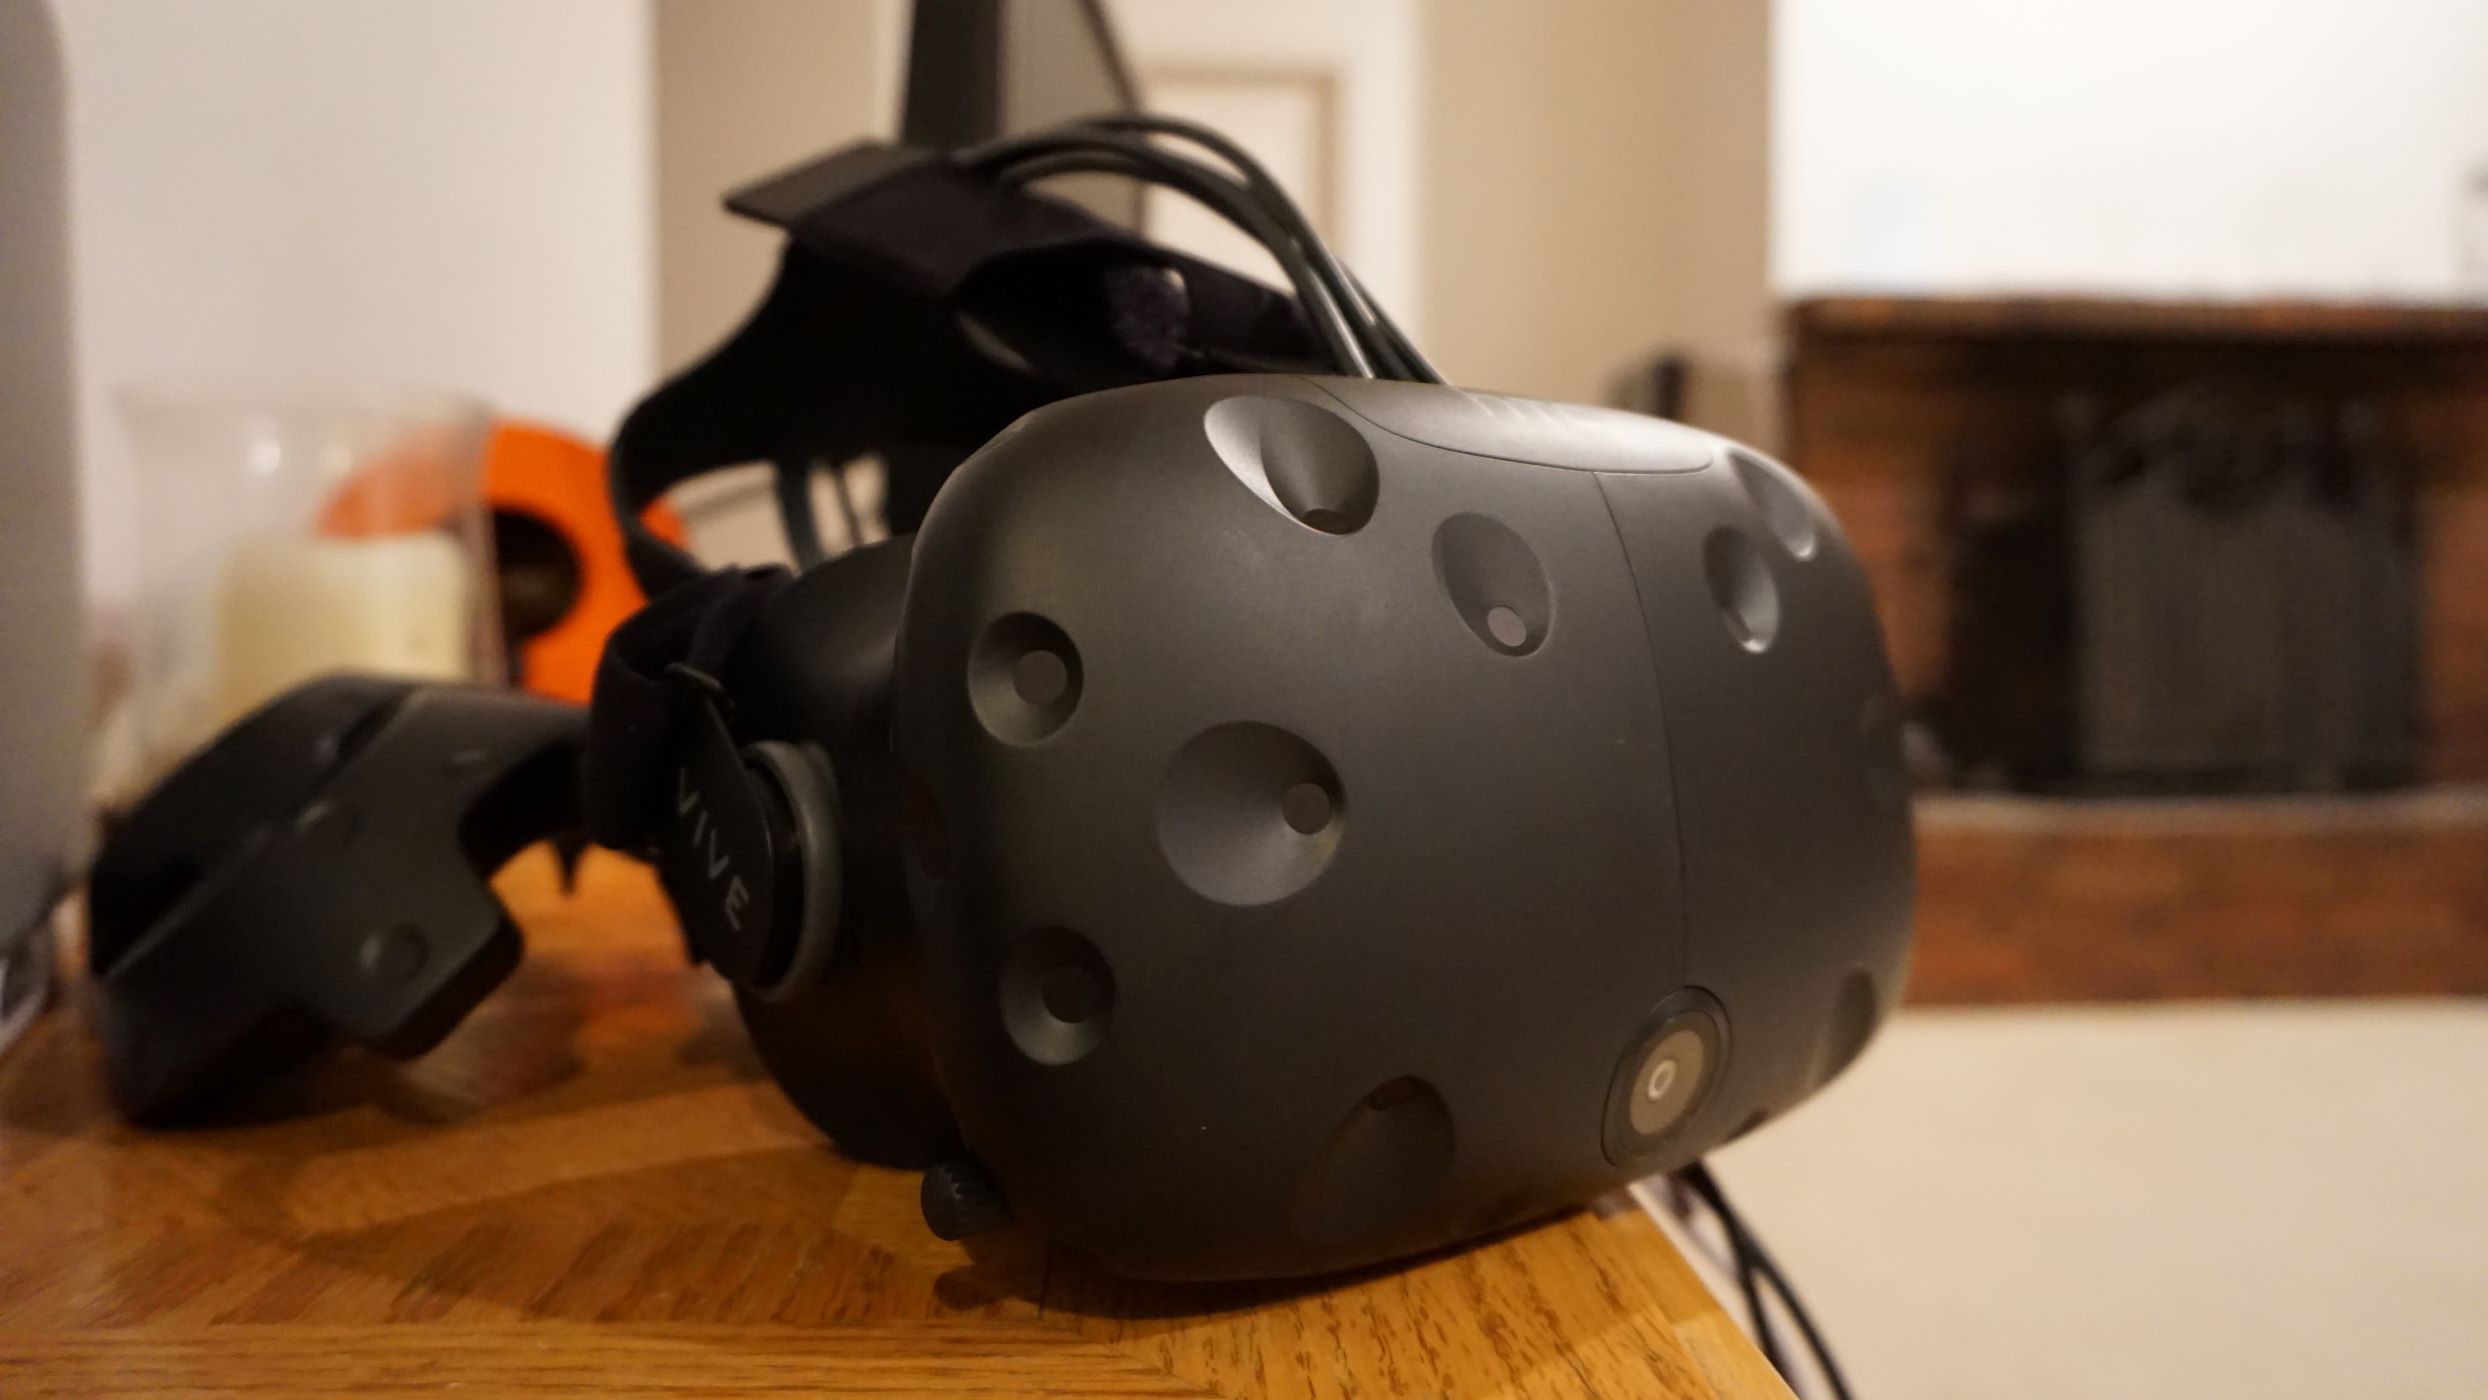 How To Get An HTC Vive